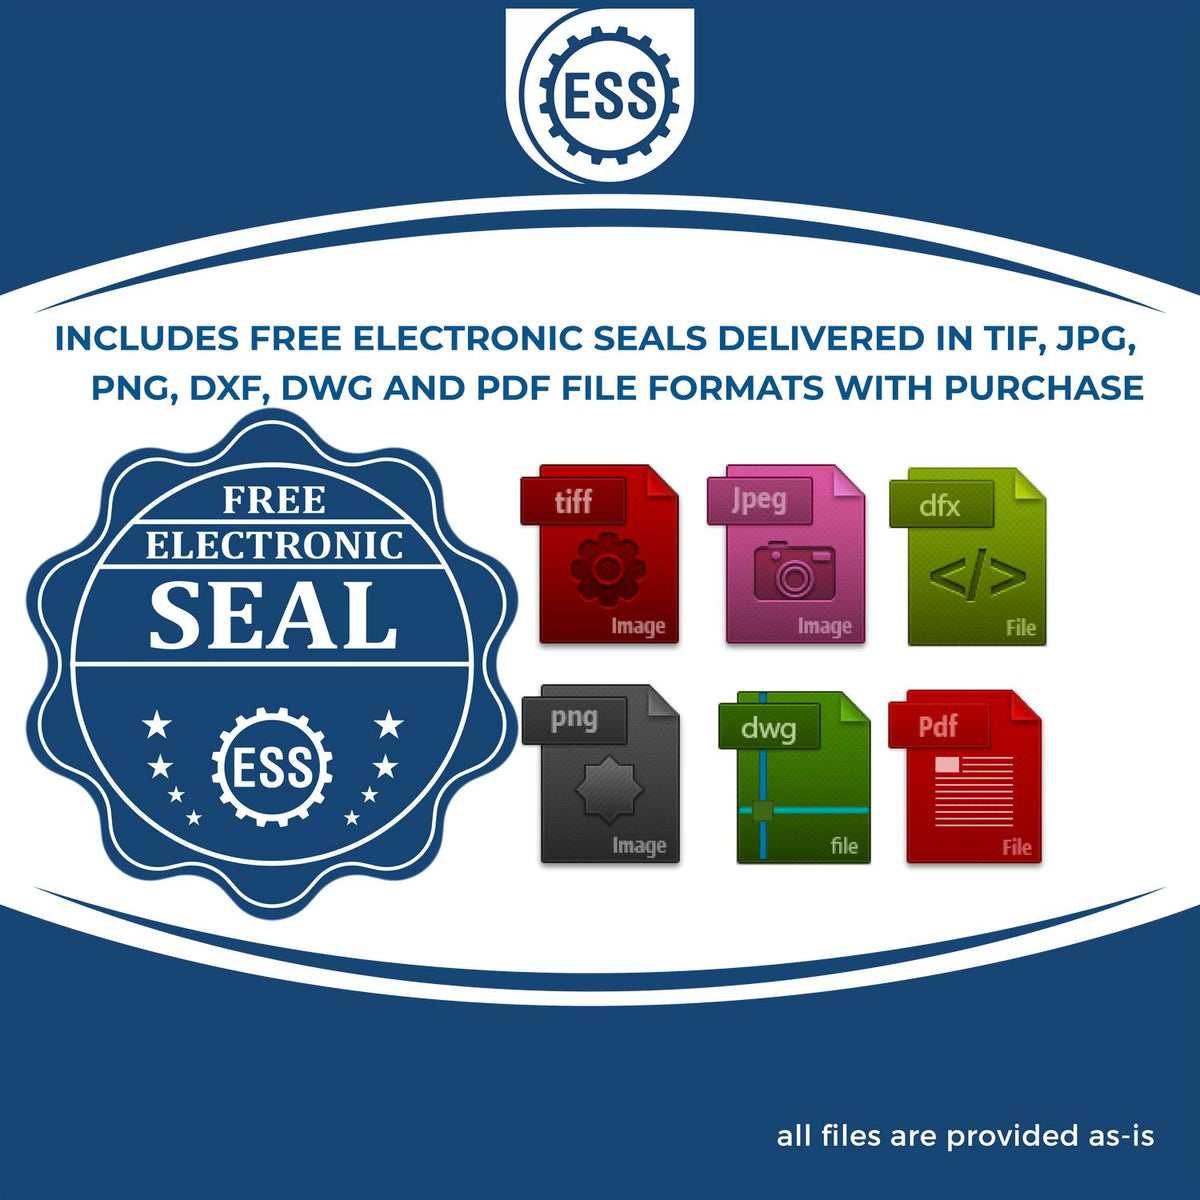 An infographic for the free electronic seal for the Long Reach Alaska Geology Seal illustrating the different file type icons such as DXF, DWG, TIF, JPG and PNG.